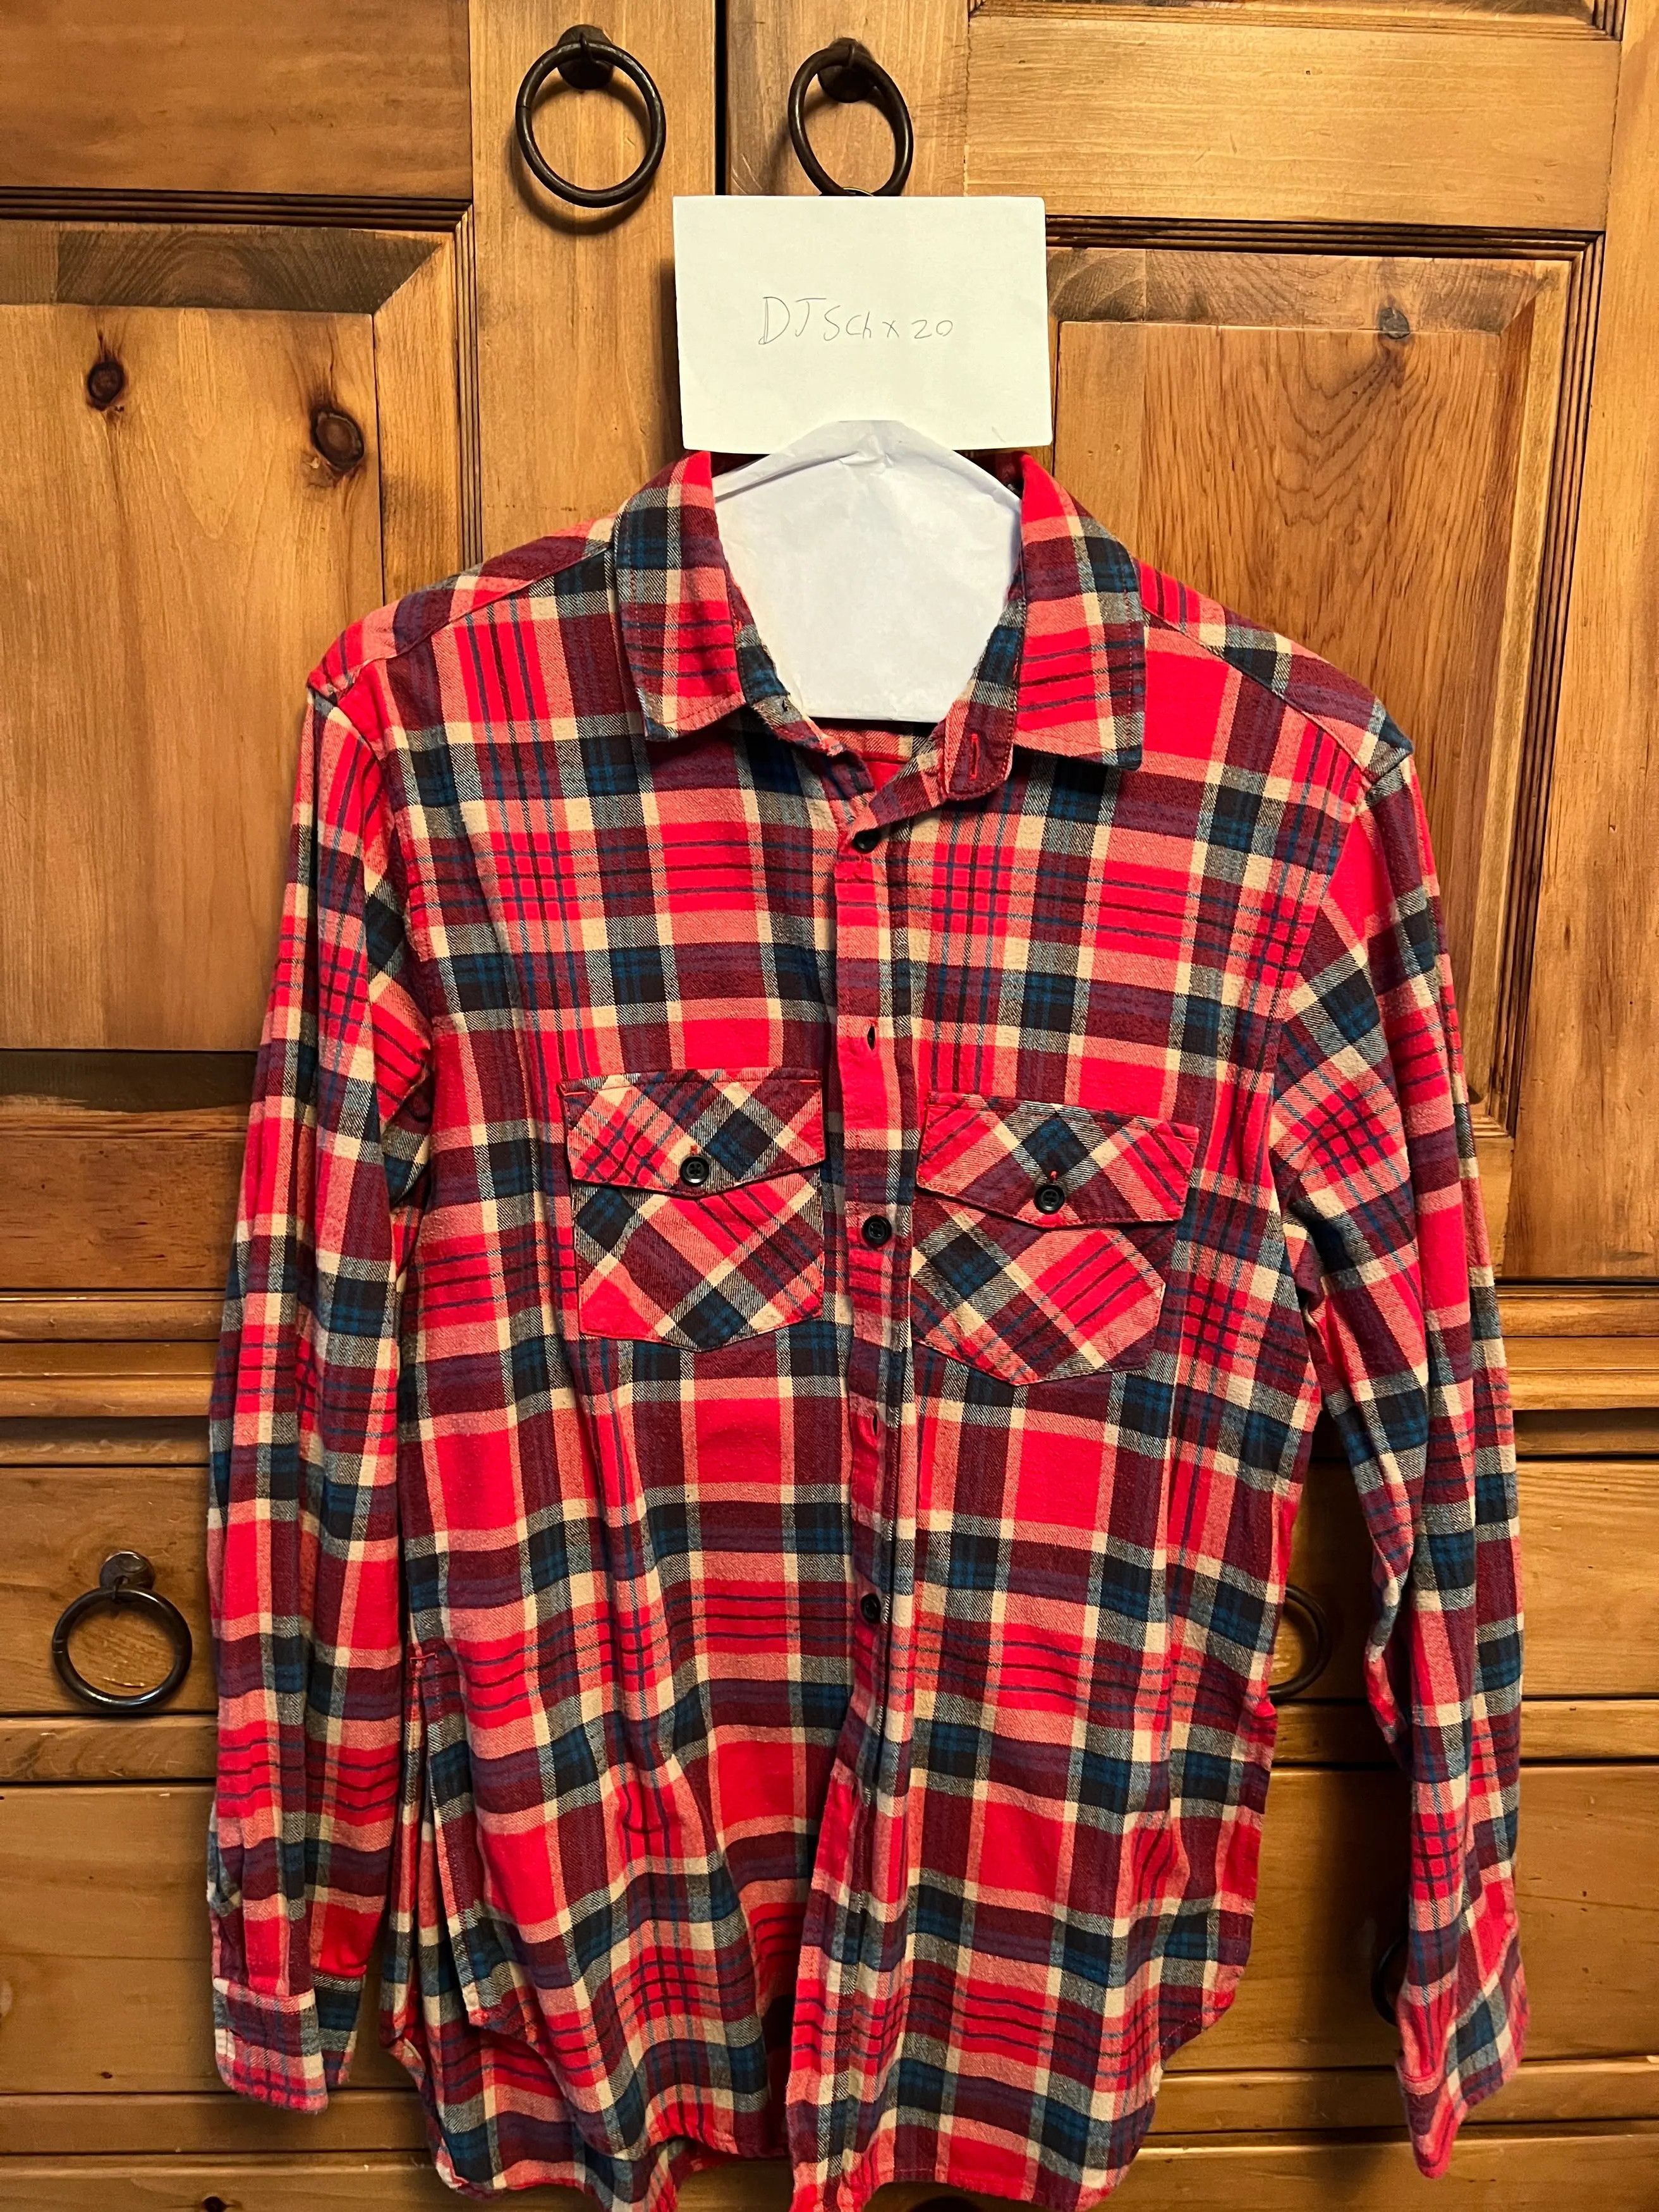 Fear Of God Flannel | Grailed